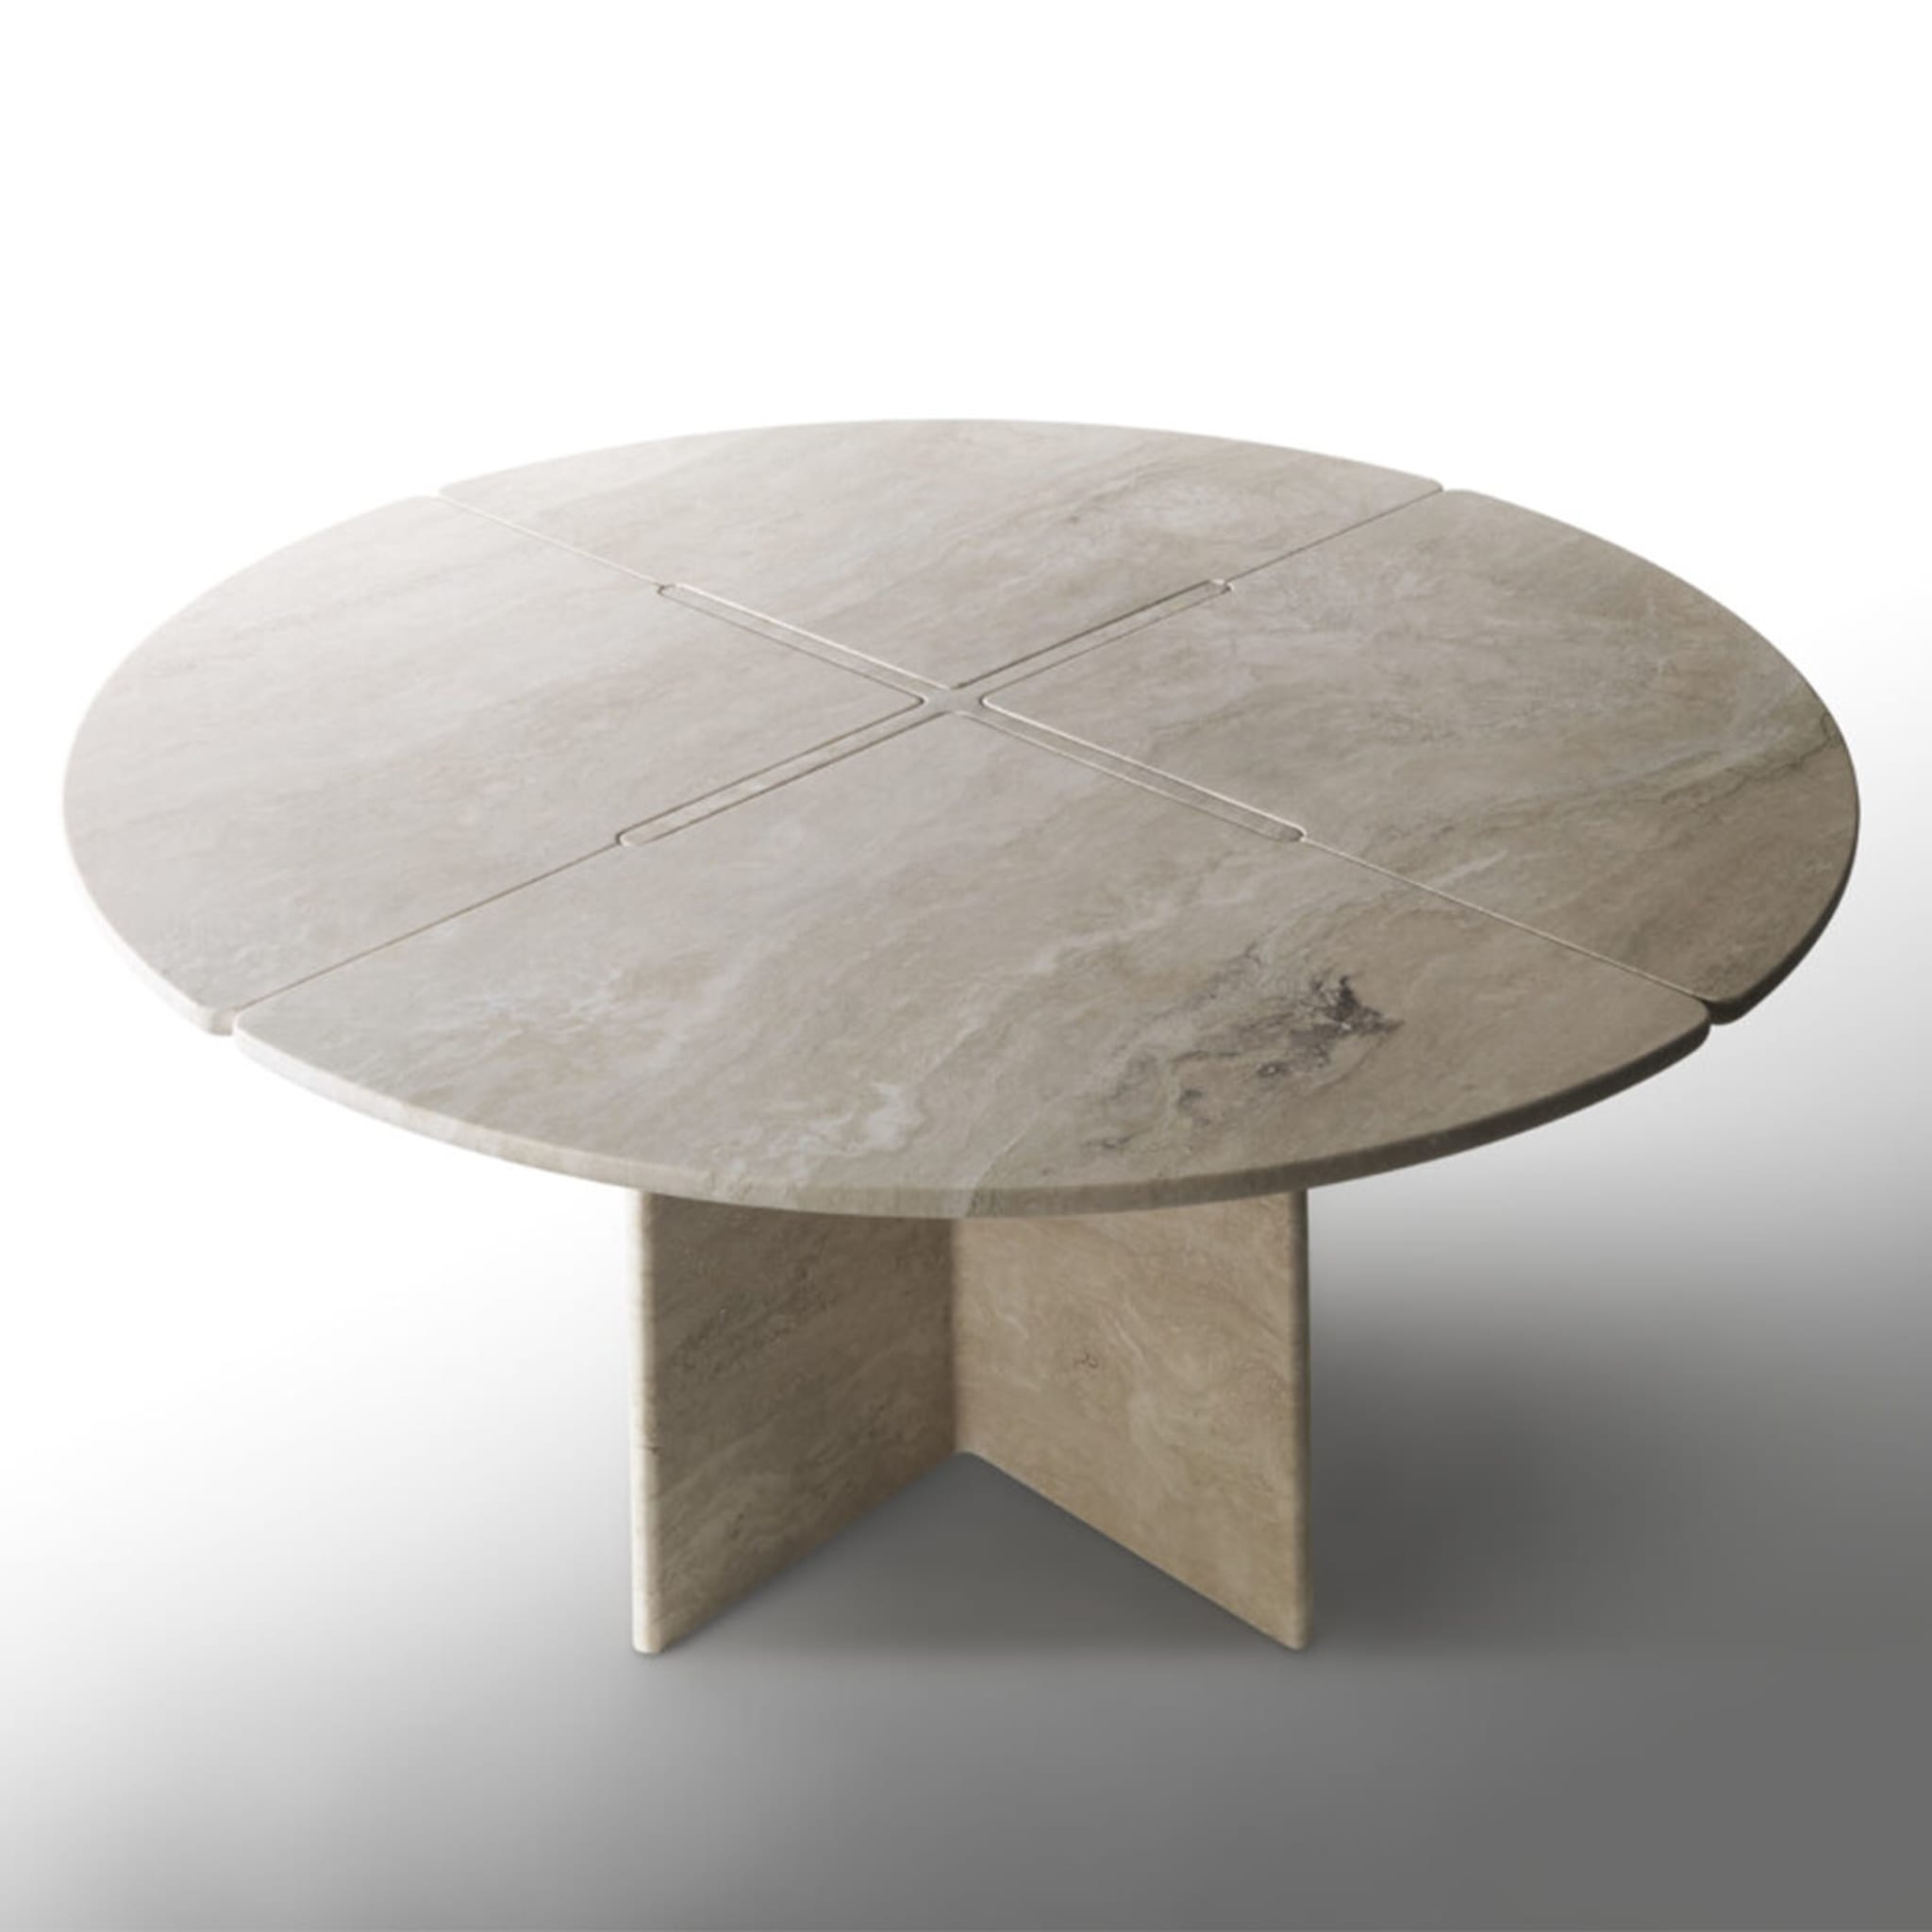 More Round Dining Table by Marco Spatti - Alternative view 2